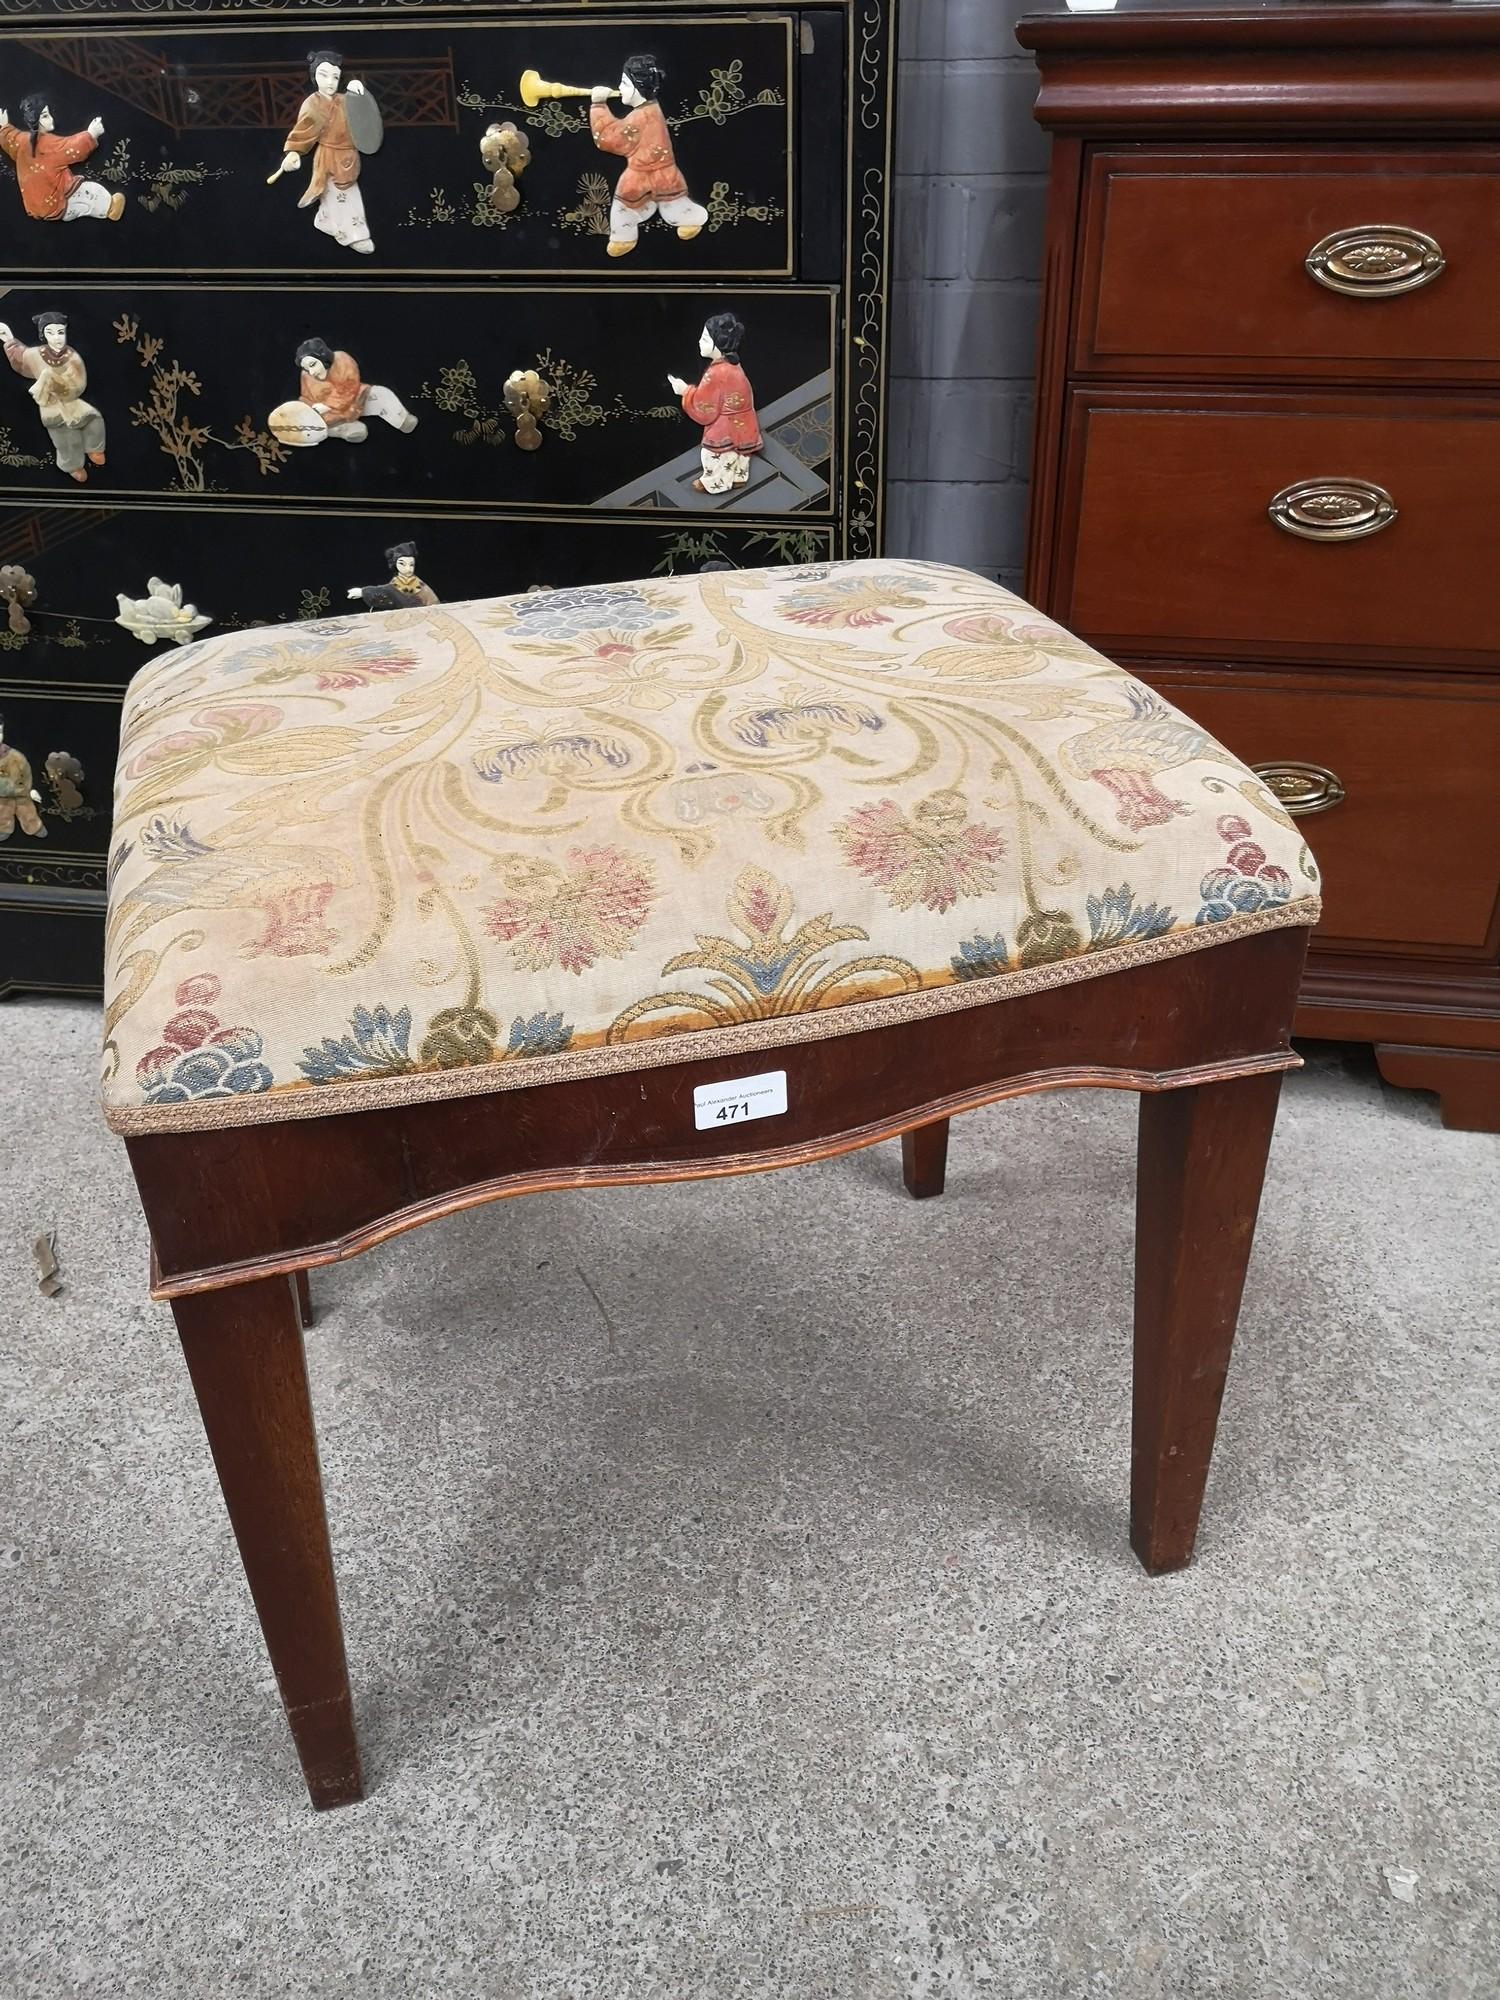 Edwardian period piano stool with art deco style upholstery.